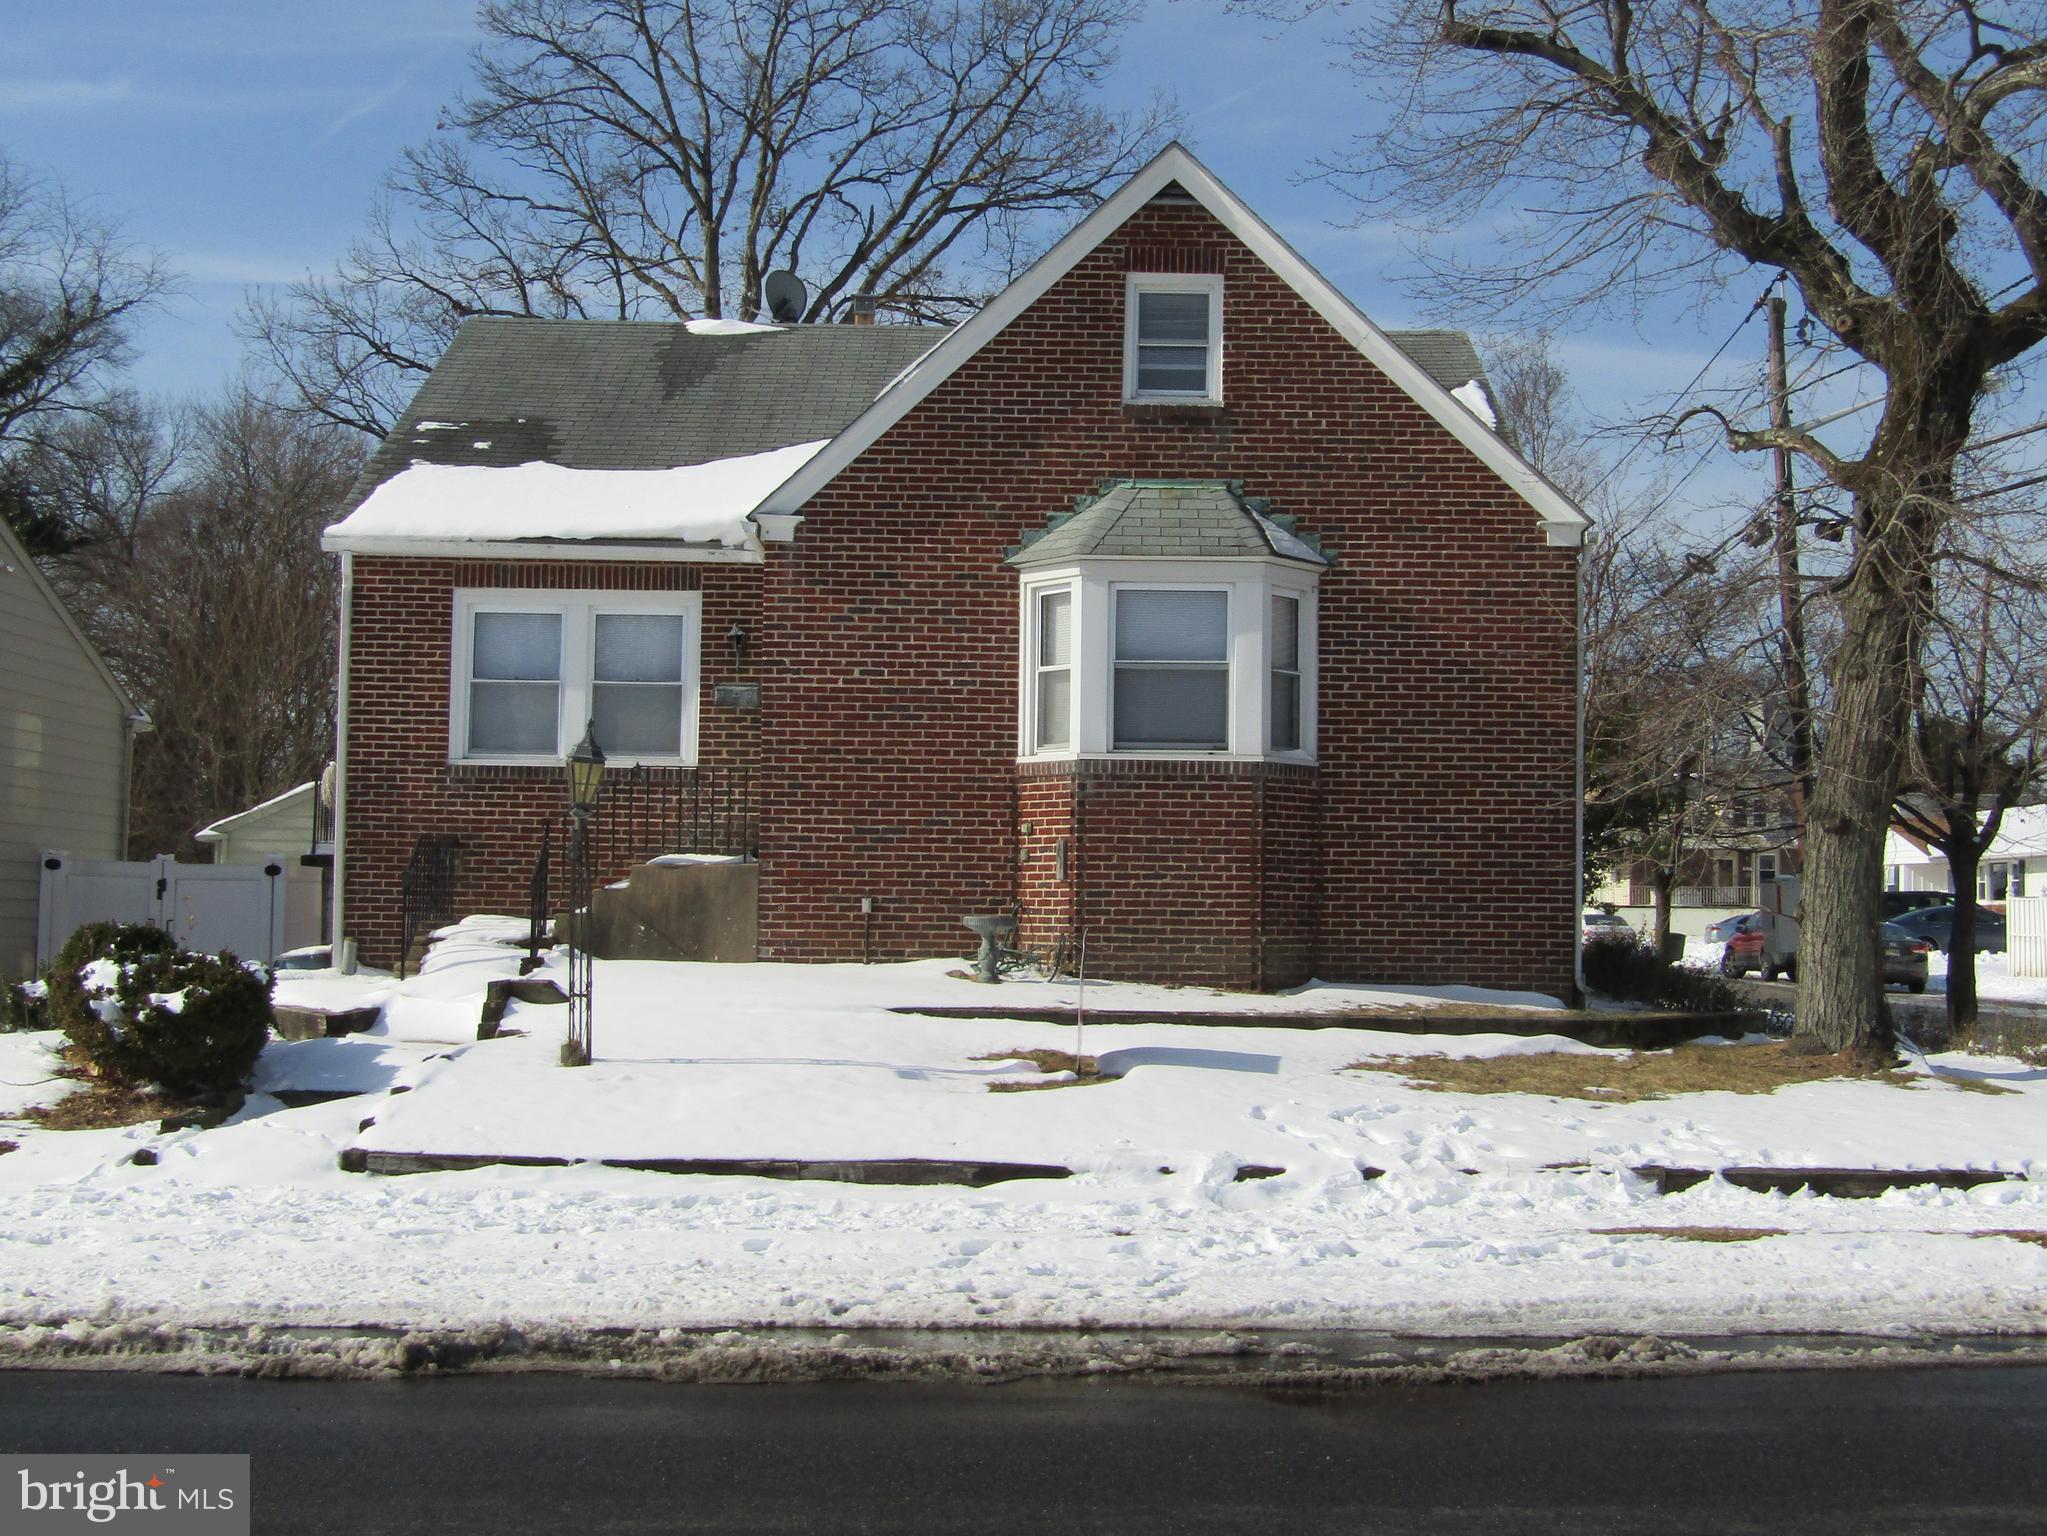 a front view of a house with snow